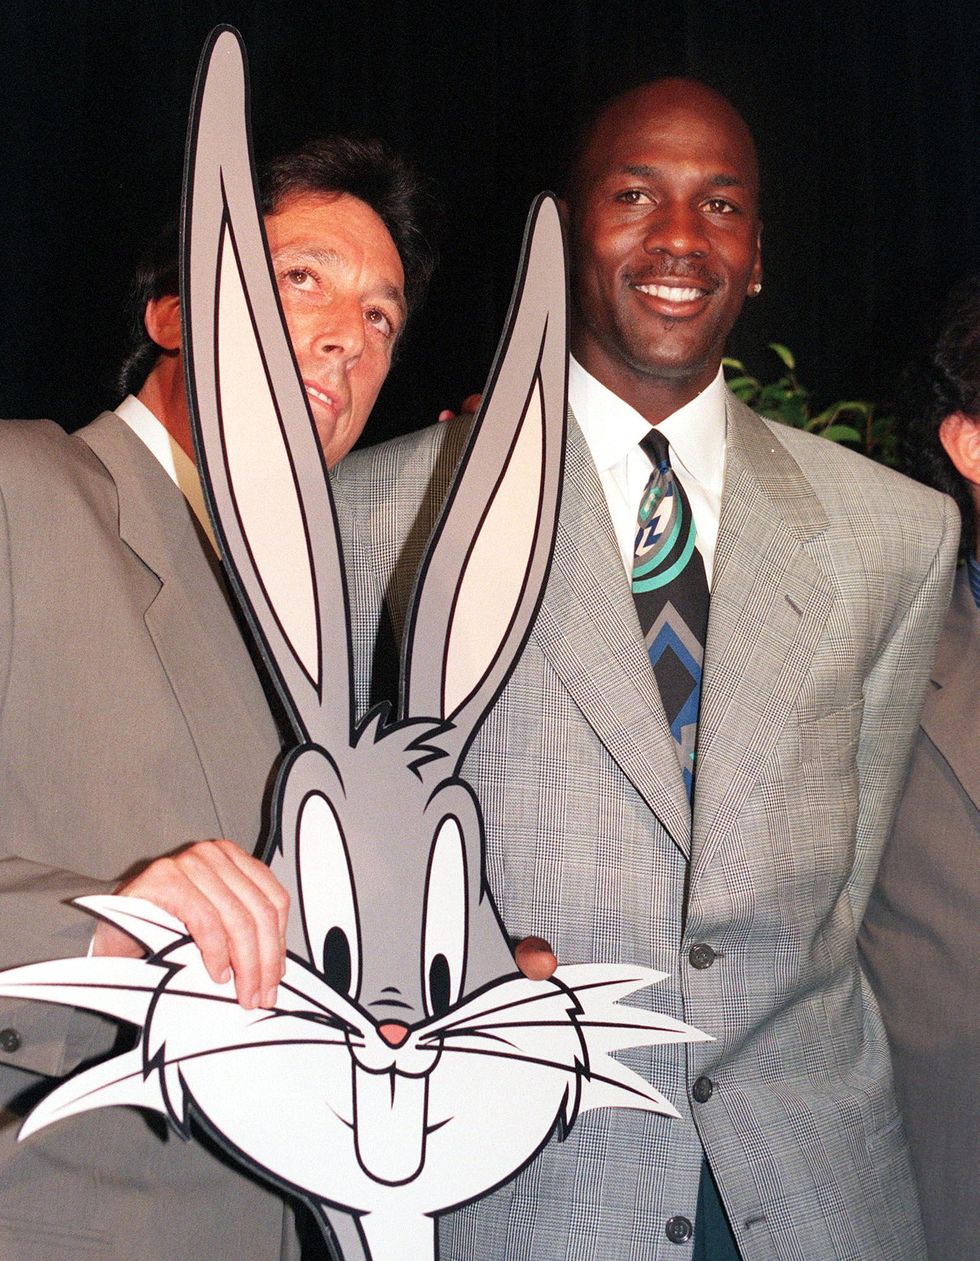 new york, ny   june 20  american basketball star michael jordan r poses with filmmaker ivan reitman l and a cutout of bugs bunny 20 june 1995 as they announce jordans film debut in an original live actionanimation comedy space jam  photo credit should read mark philipsafp via getty images